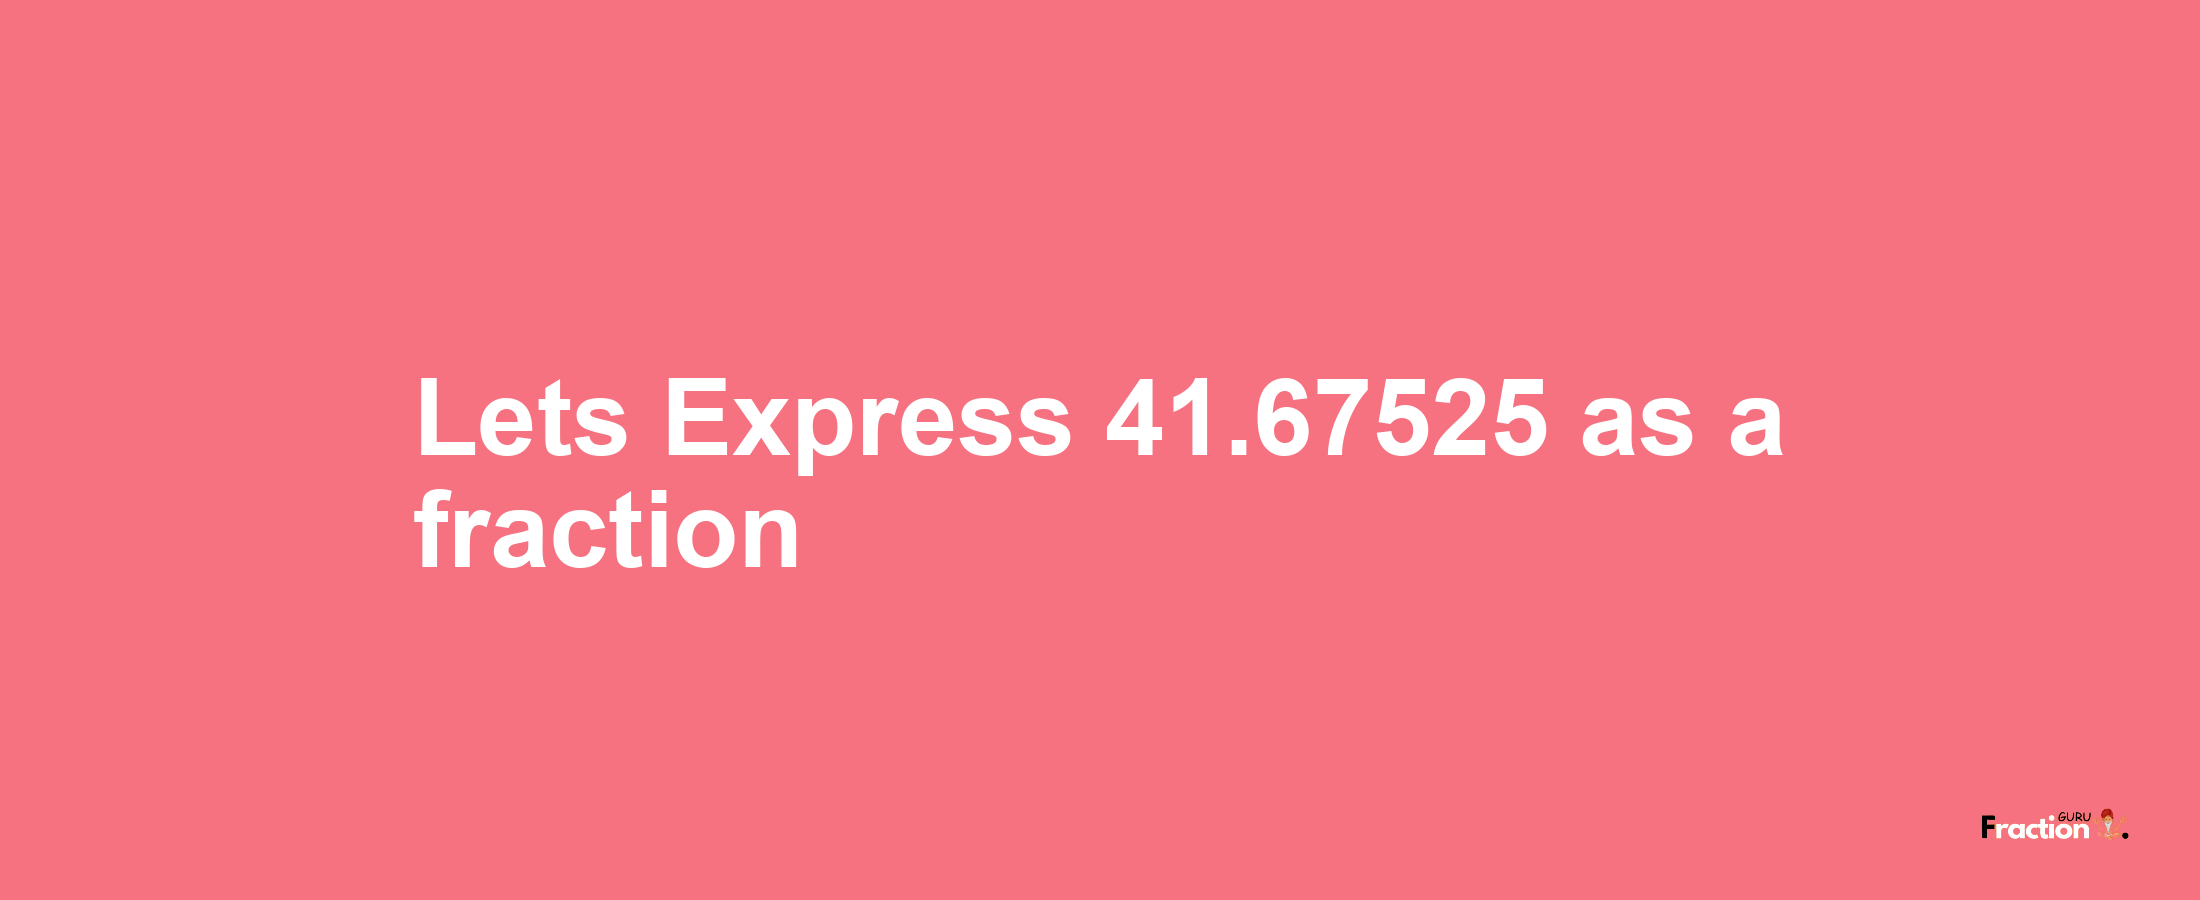 Lets Express 41.67525 as afraction